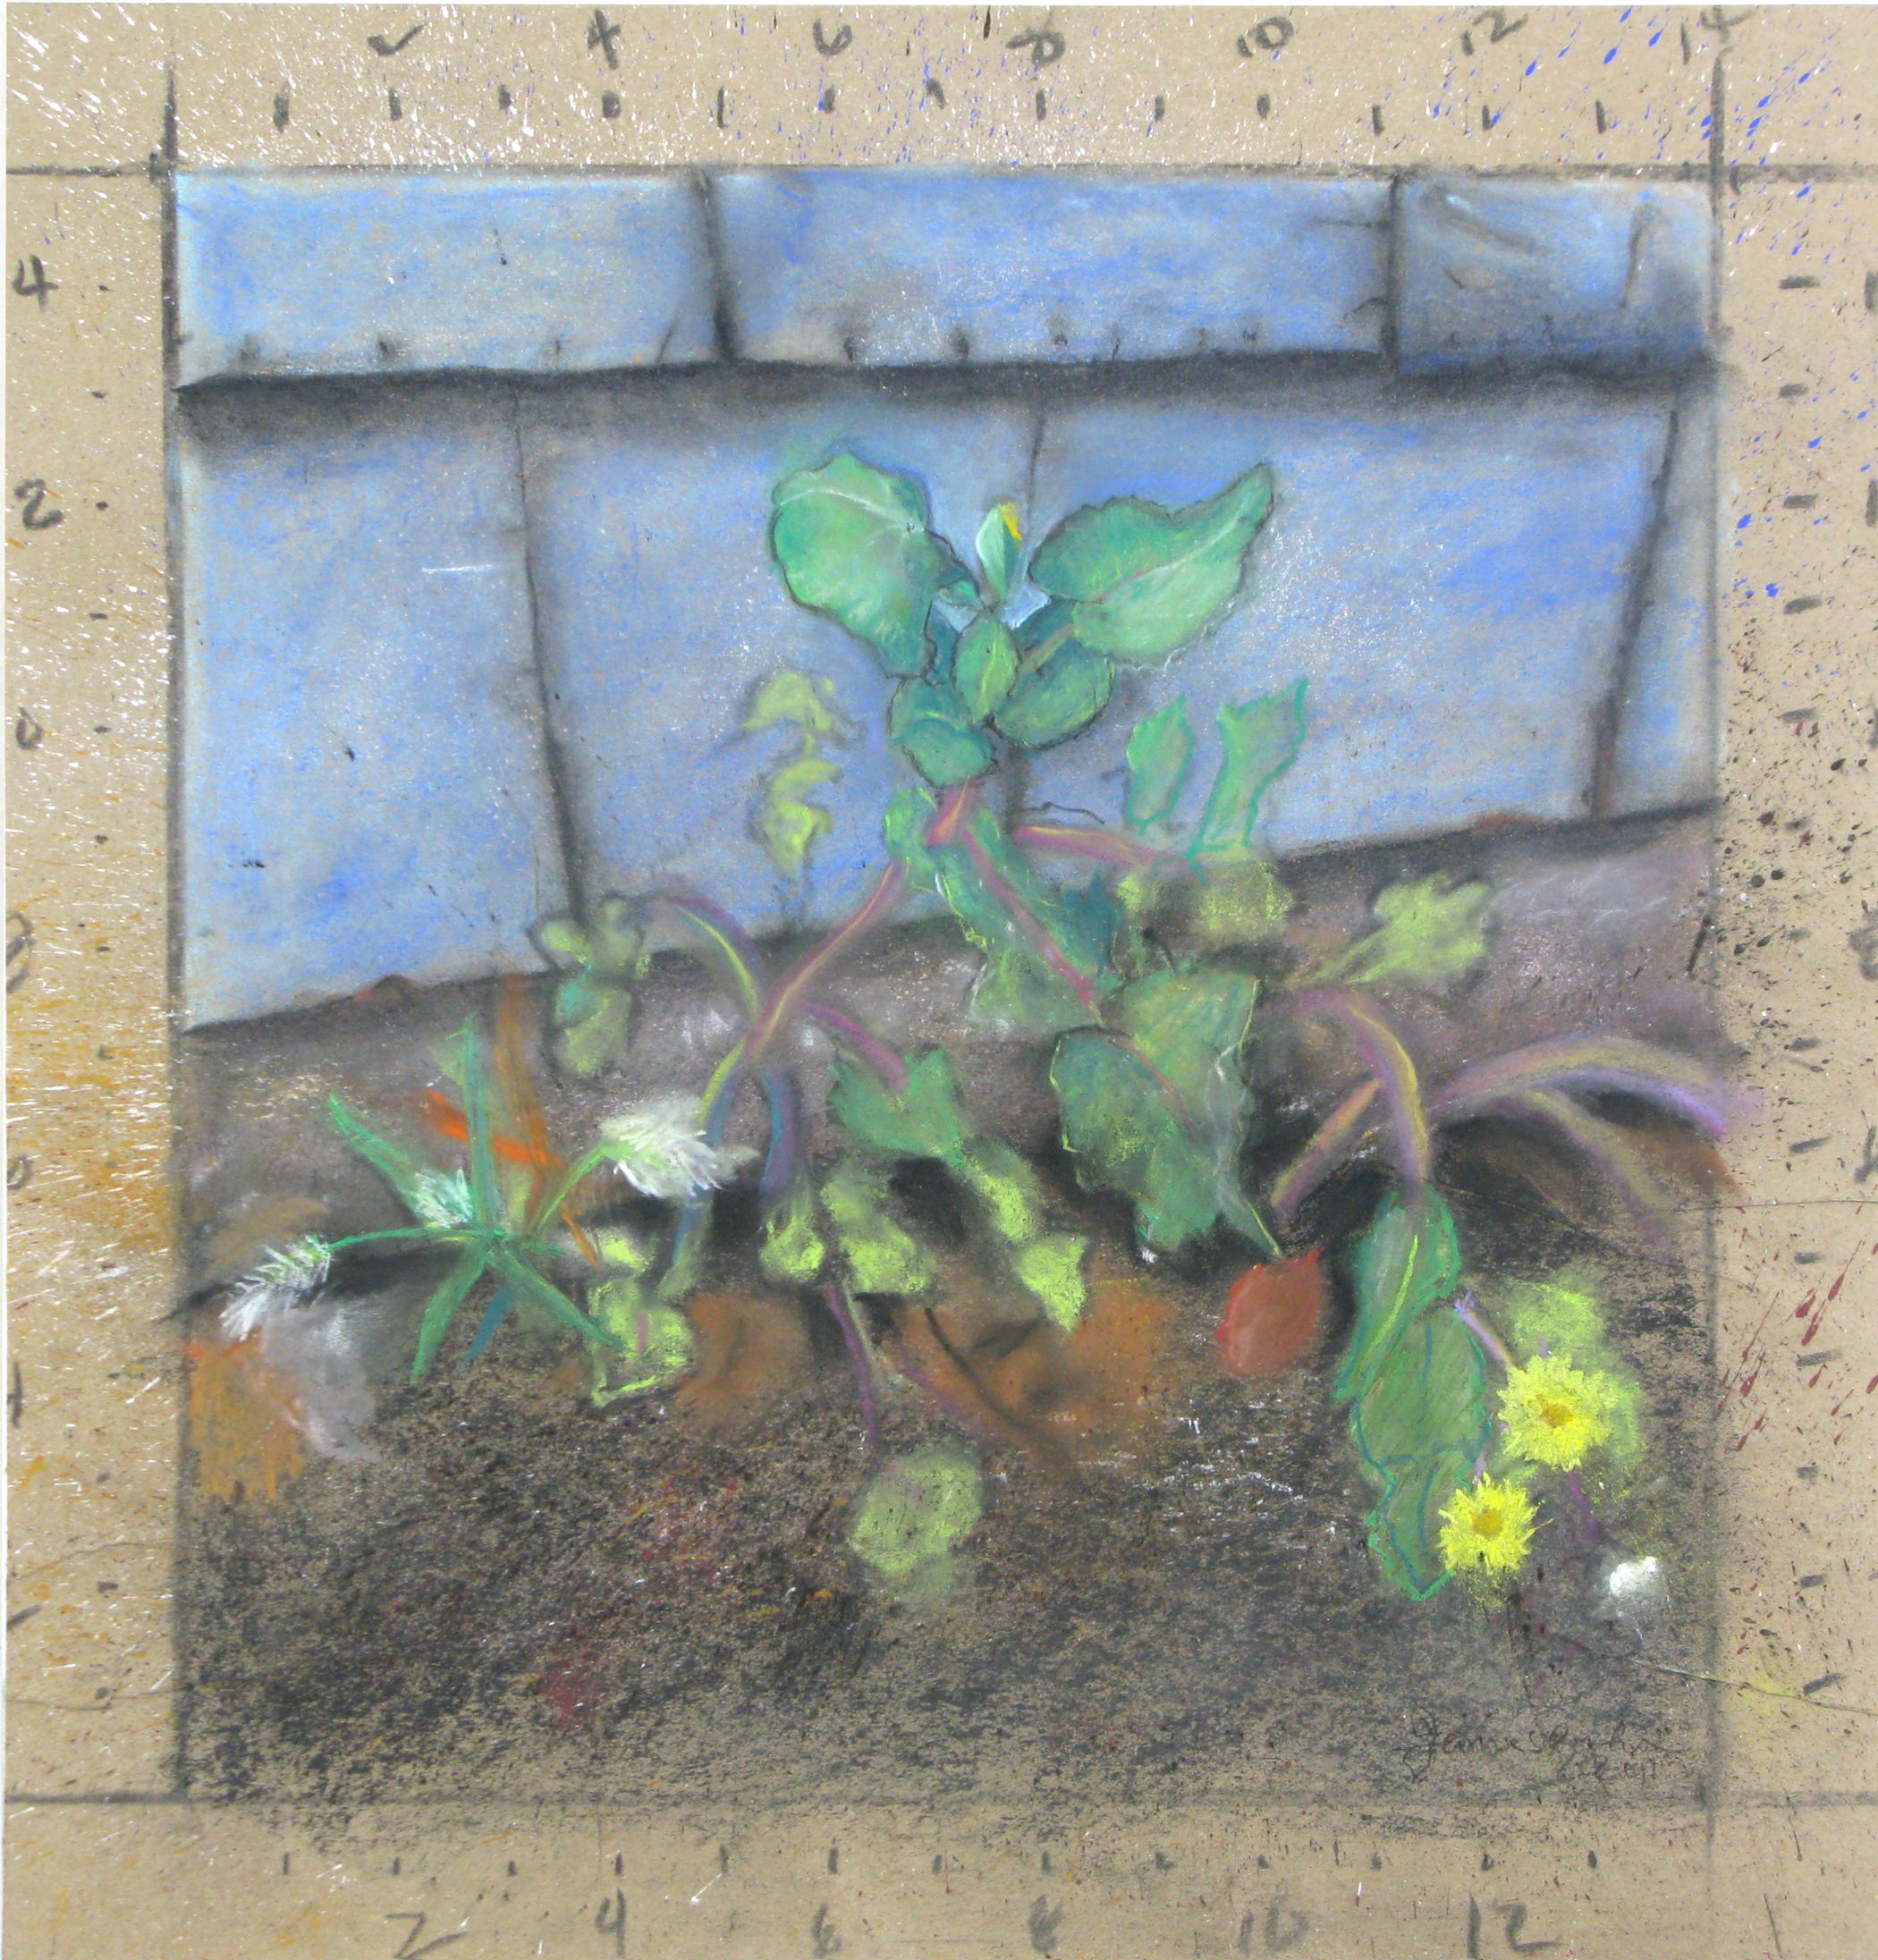  Jim Banks,  Thrive Where You’re Planted , Pastel, gouache on paper, 18.5 x 17.5 